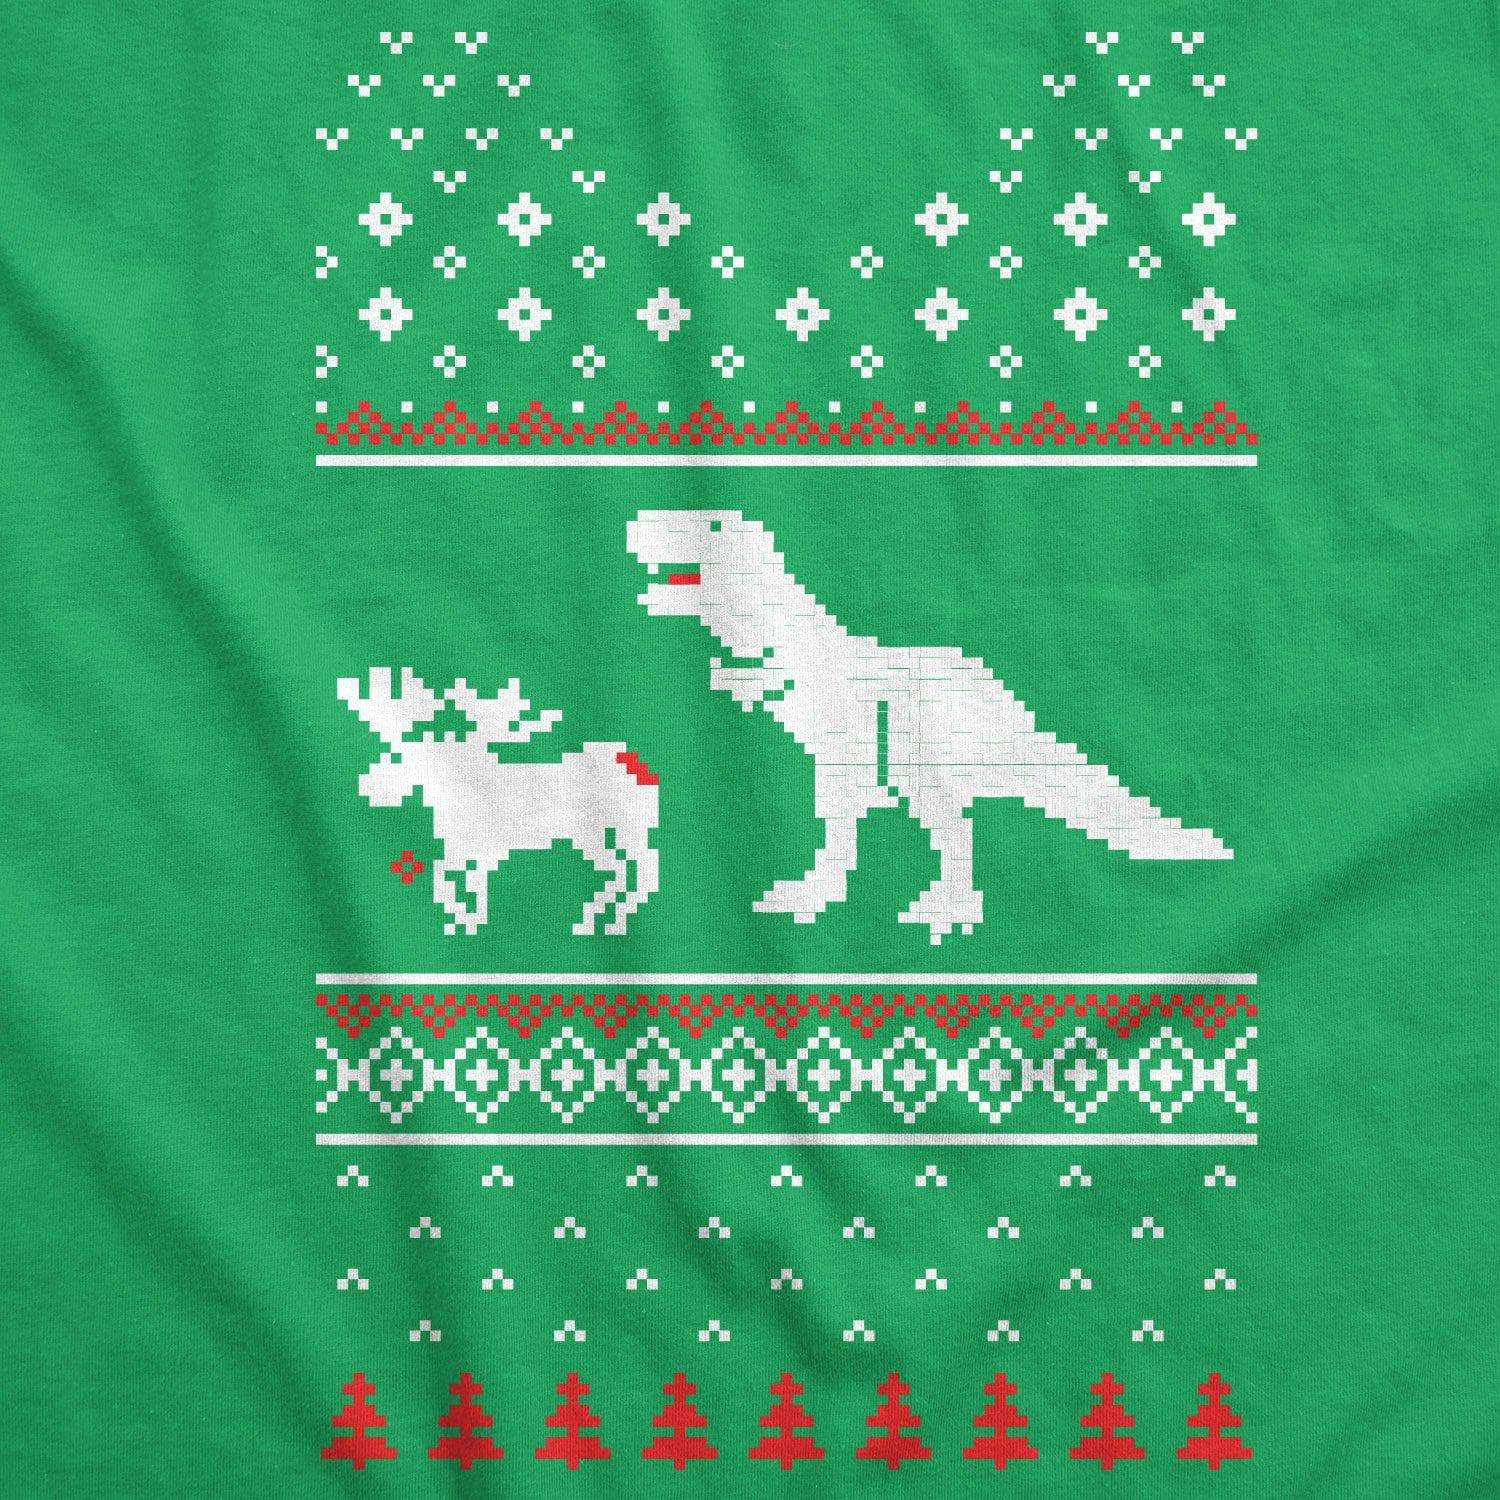 T-Rex Attack Christmas Ugly Sweater Crew Neck Sweatshirt - Crazy Dog T-Shirts